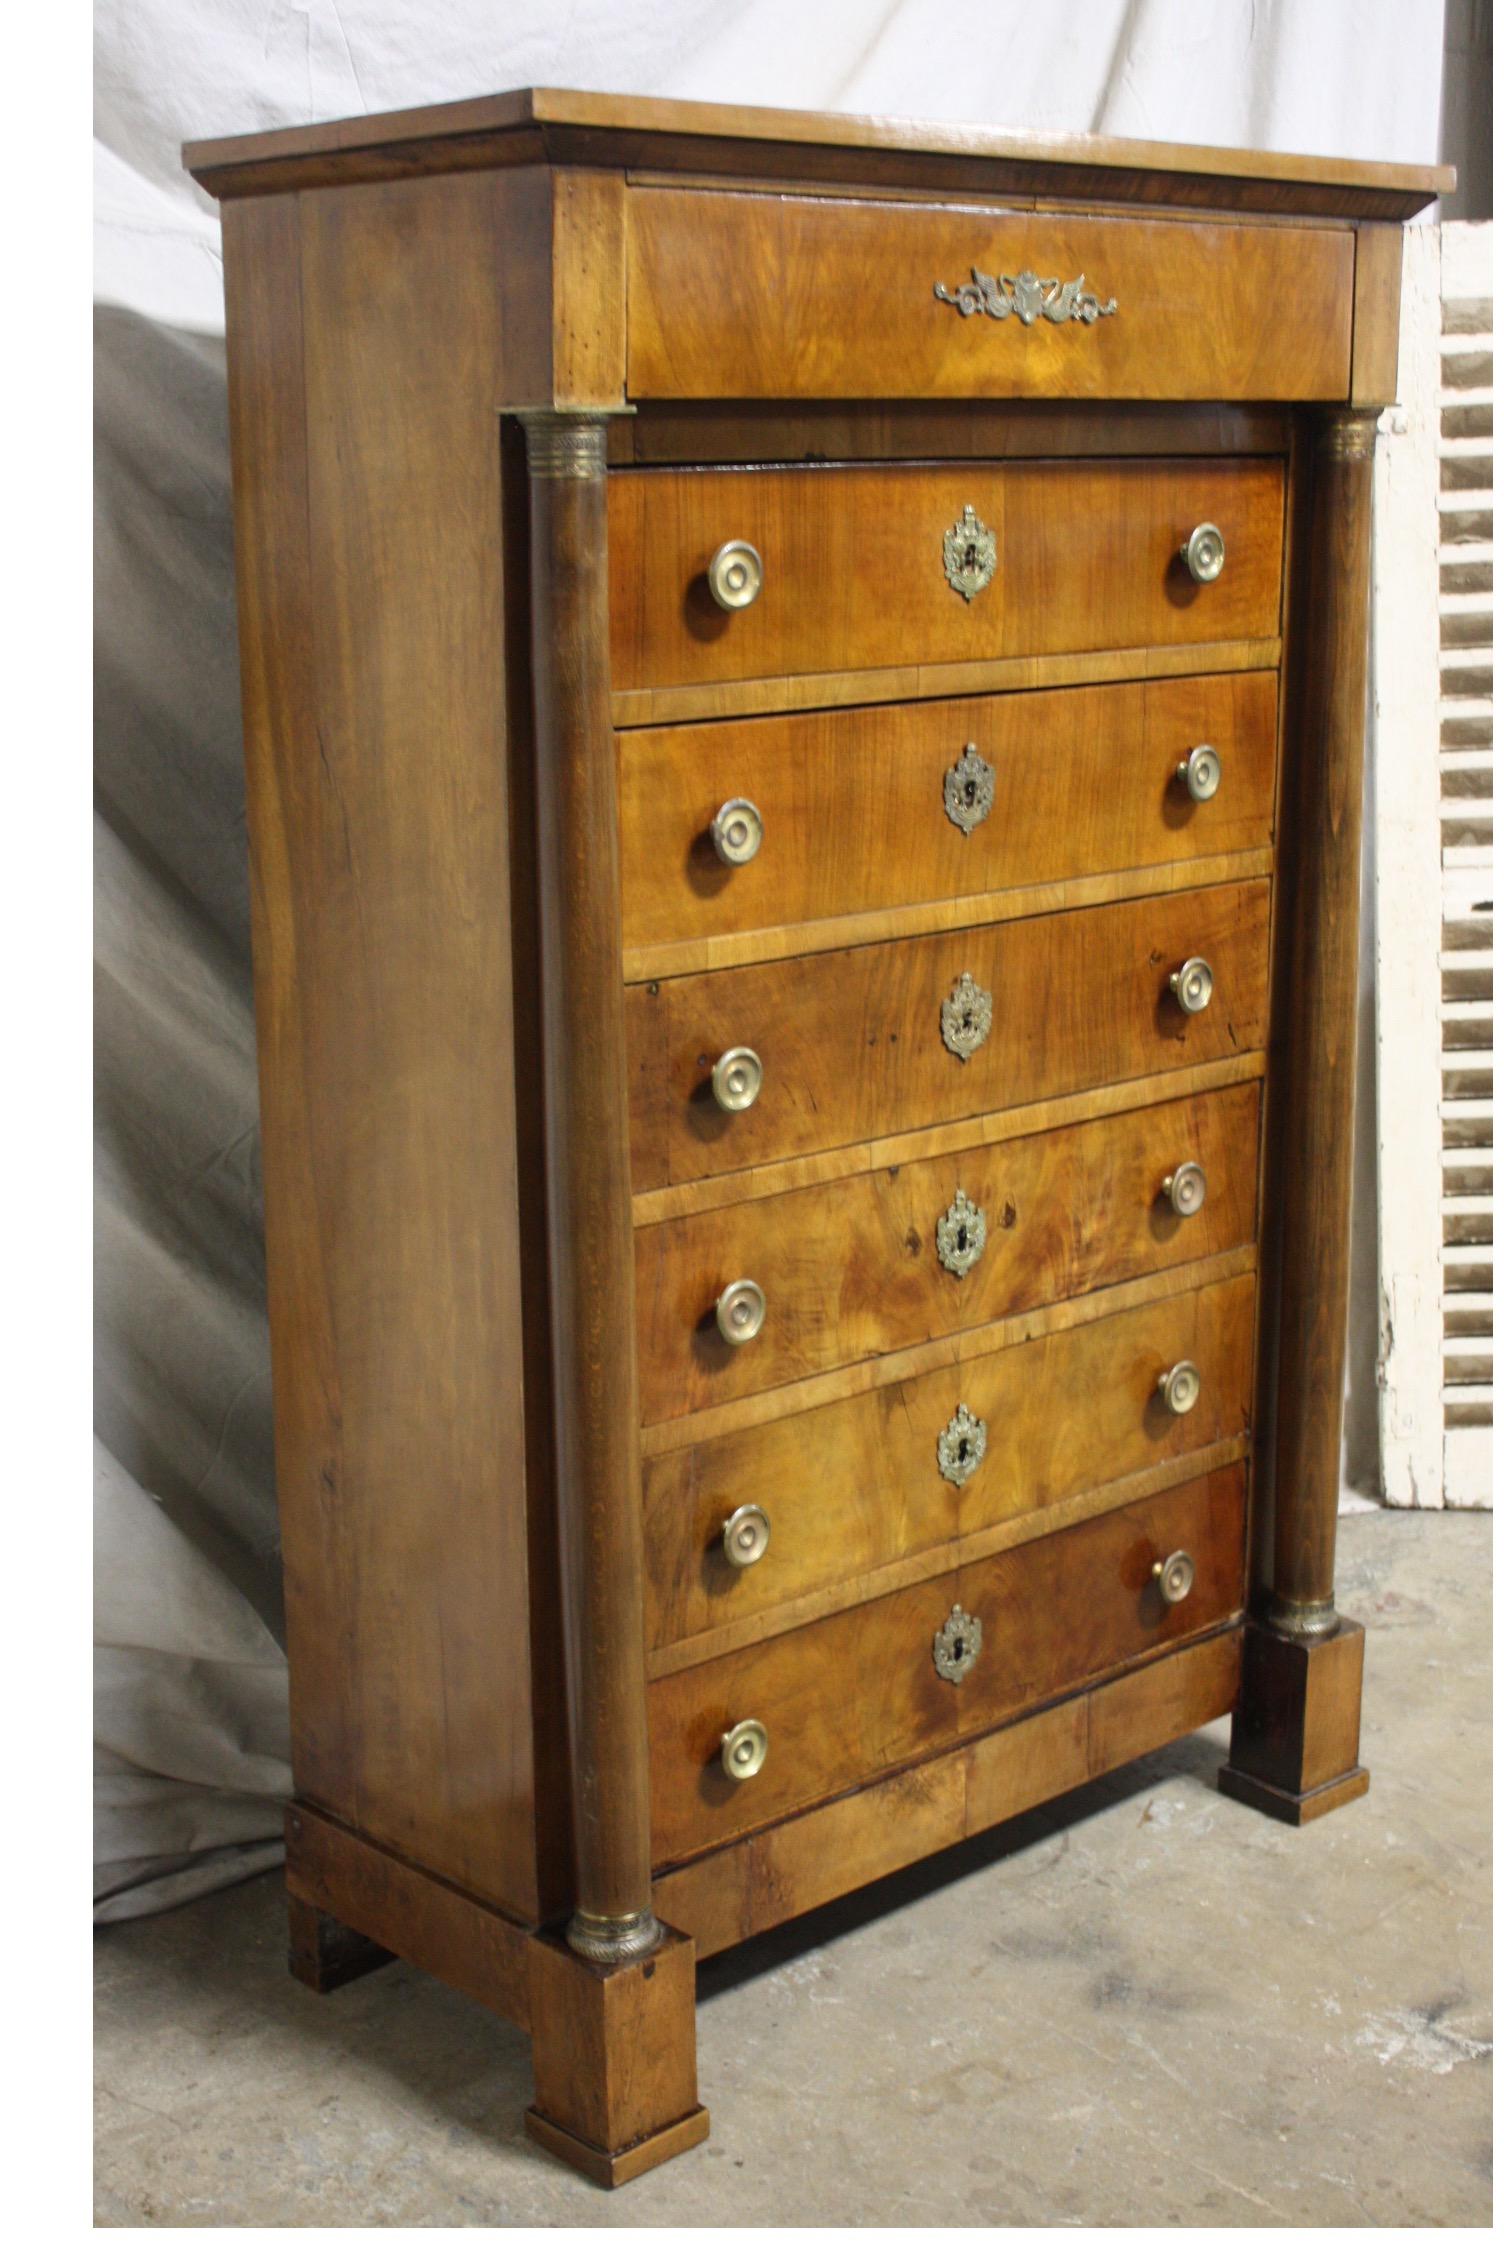 Beautiful 19th century French Empire weekly dresser.